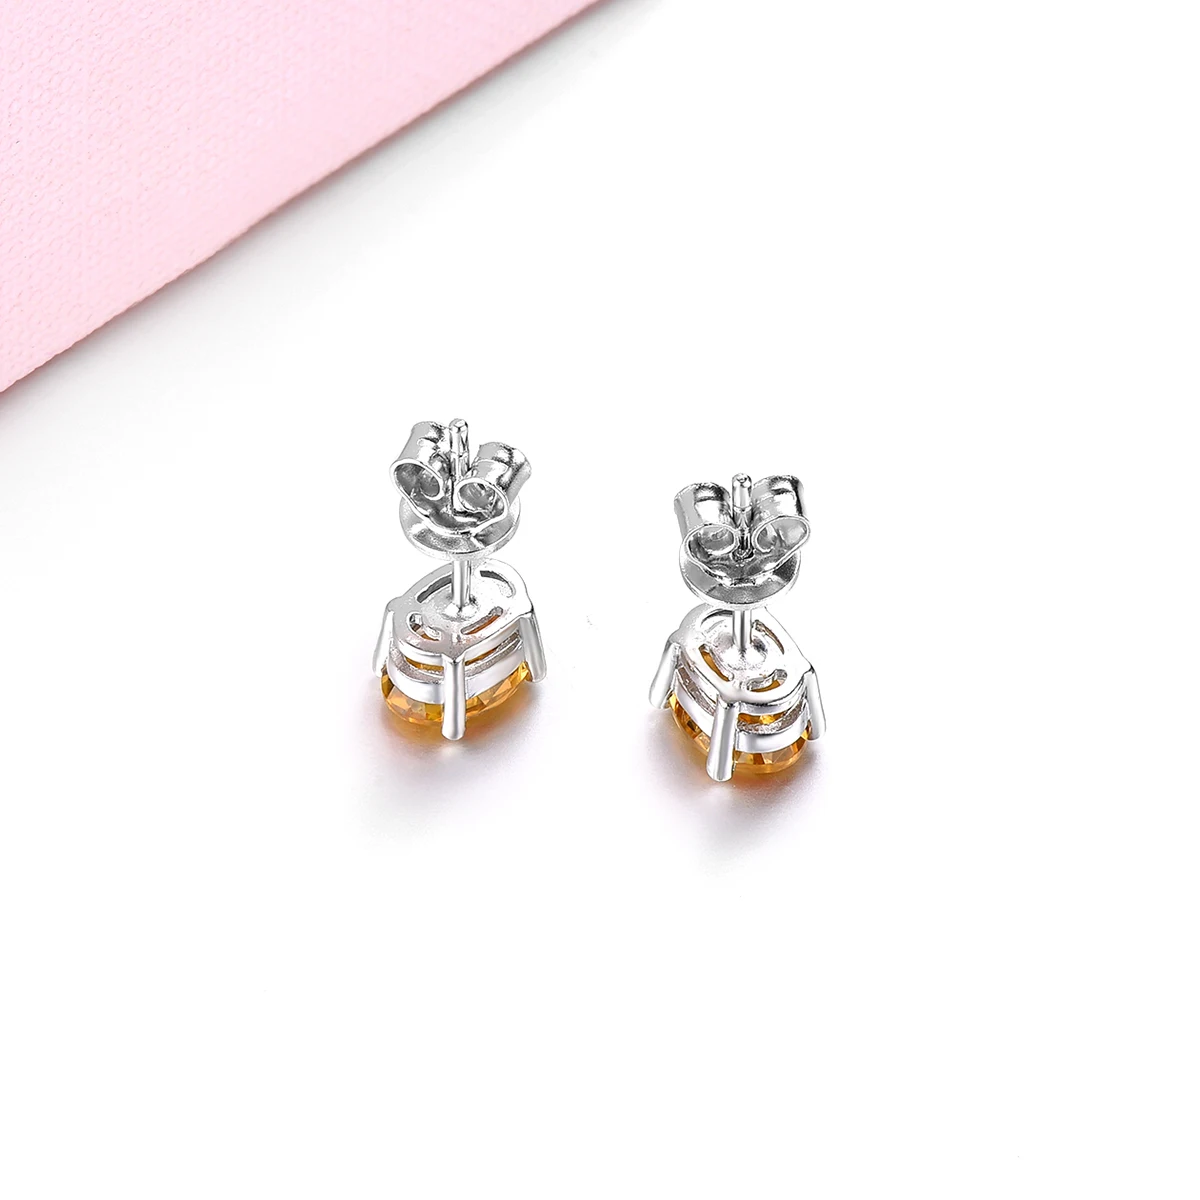 Natural Genuine Citrine S925 Silver Stud Earrings Oval Faced Cut Fine Elegant Gemstone Jewelry Women's Favorite Style Gifts